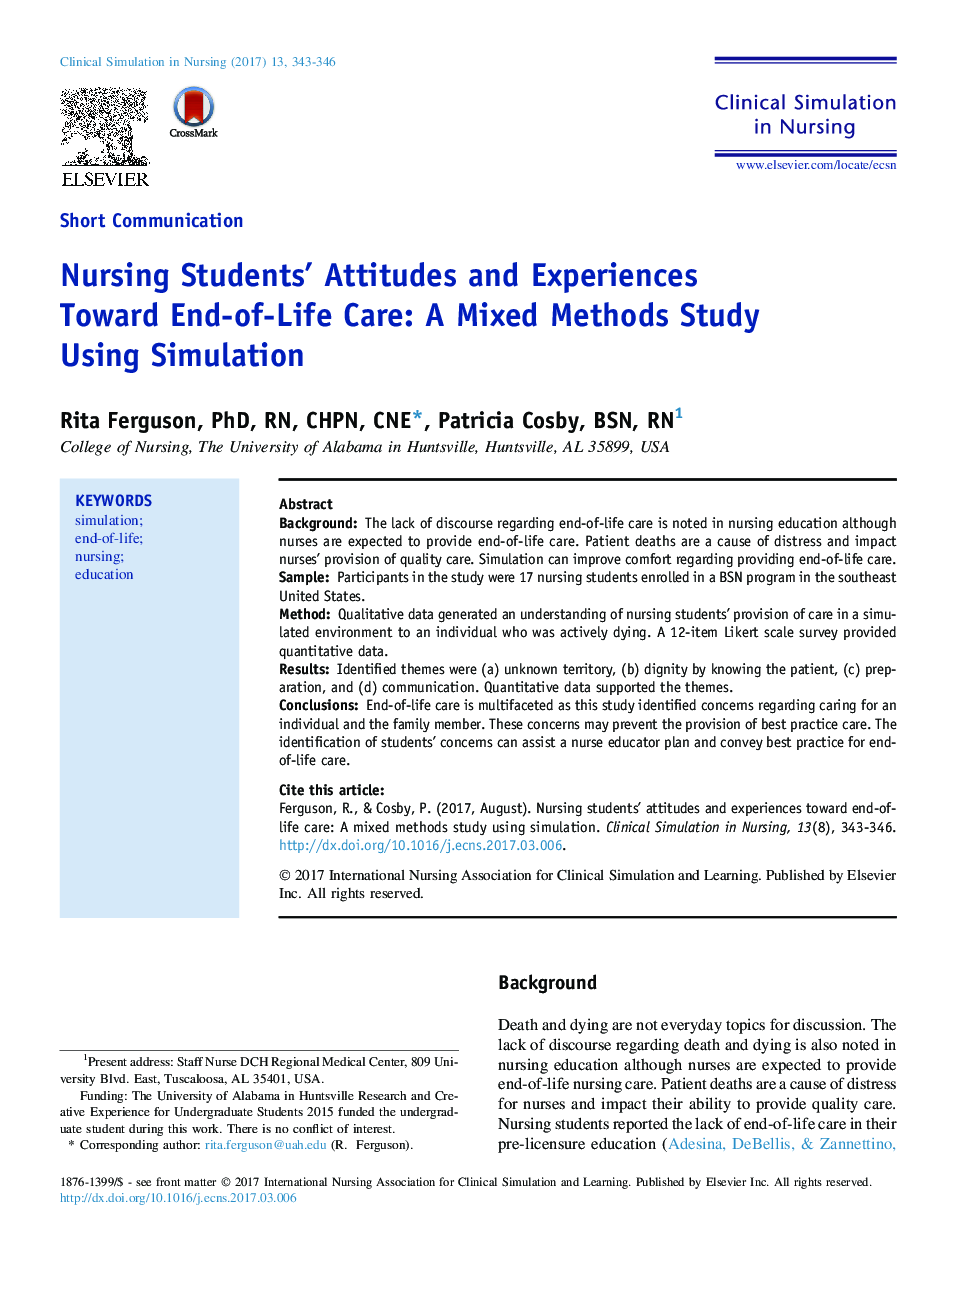 Nursing Students' Attitudes and Experiences Toward End-of-Life Care: A Mixed Methods Study Using Simulation